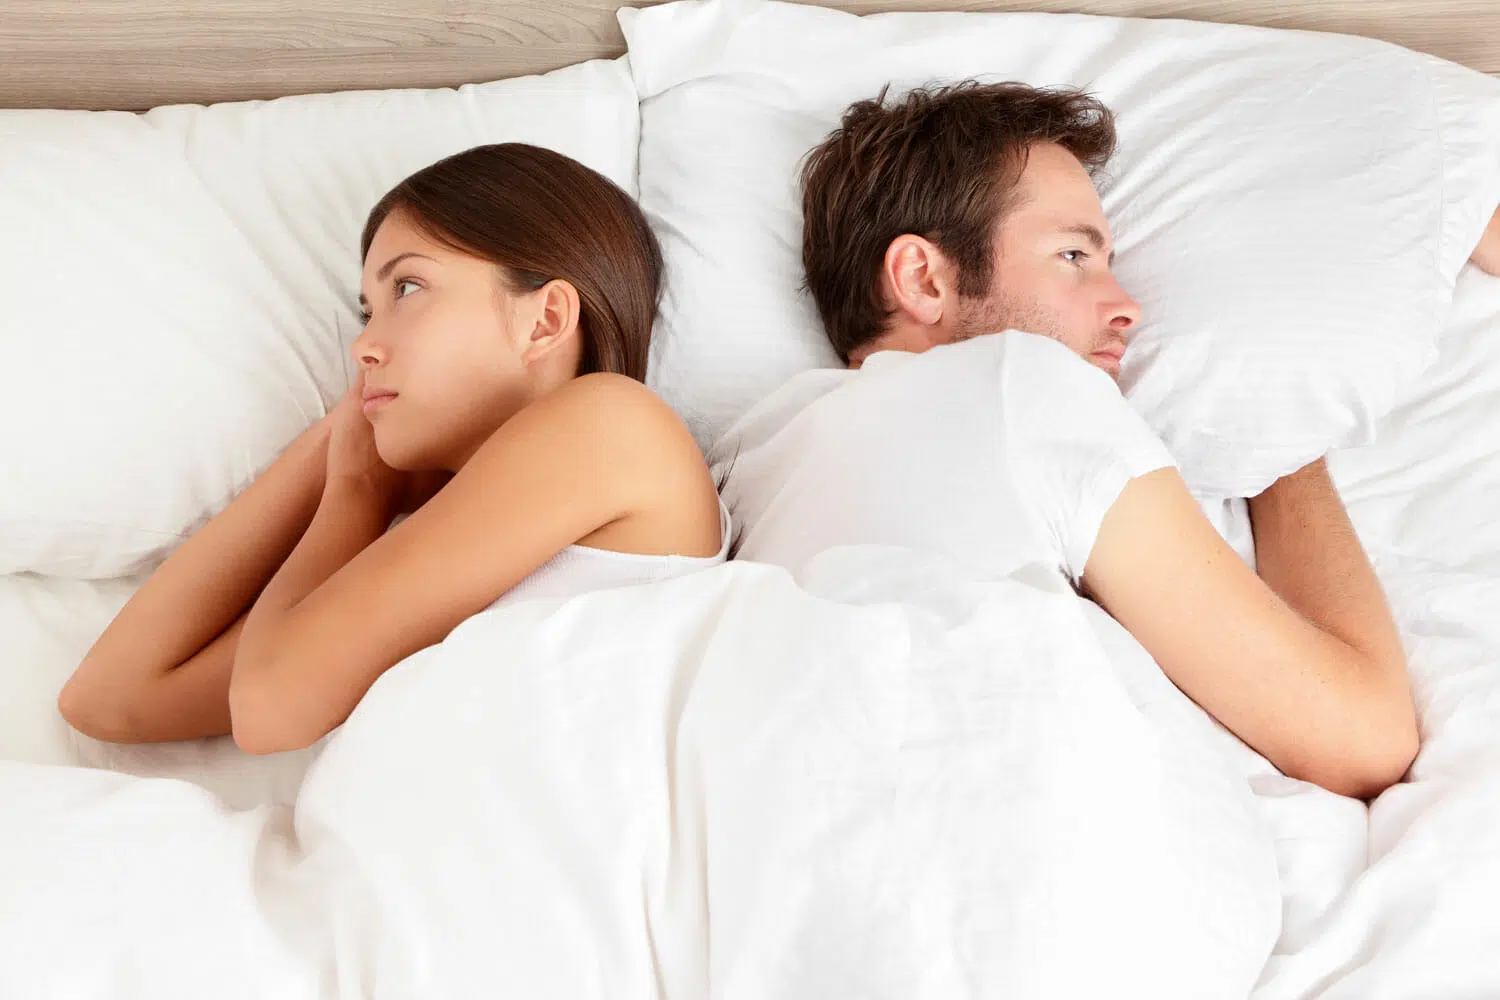 Can I Divorce My Wife For Not Sleeping With